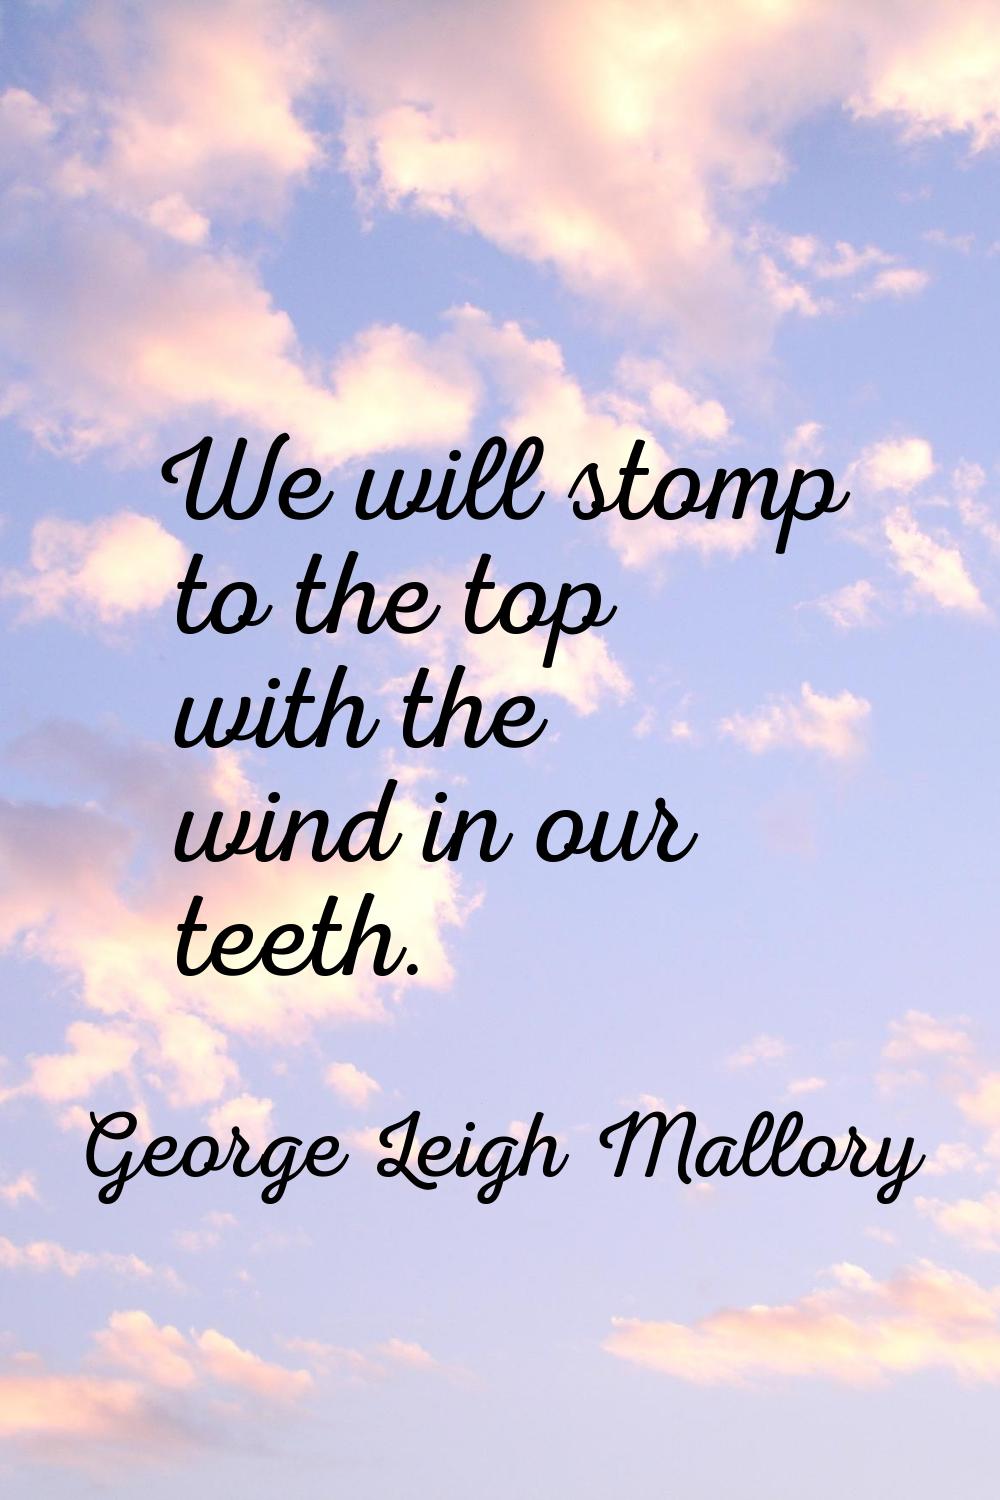 We will stomp to the top with the wind in our teeth.